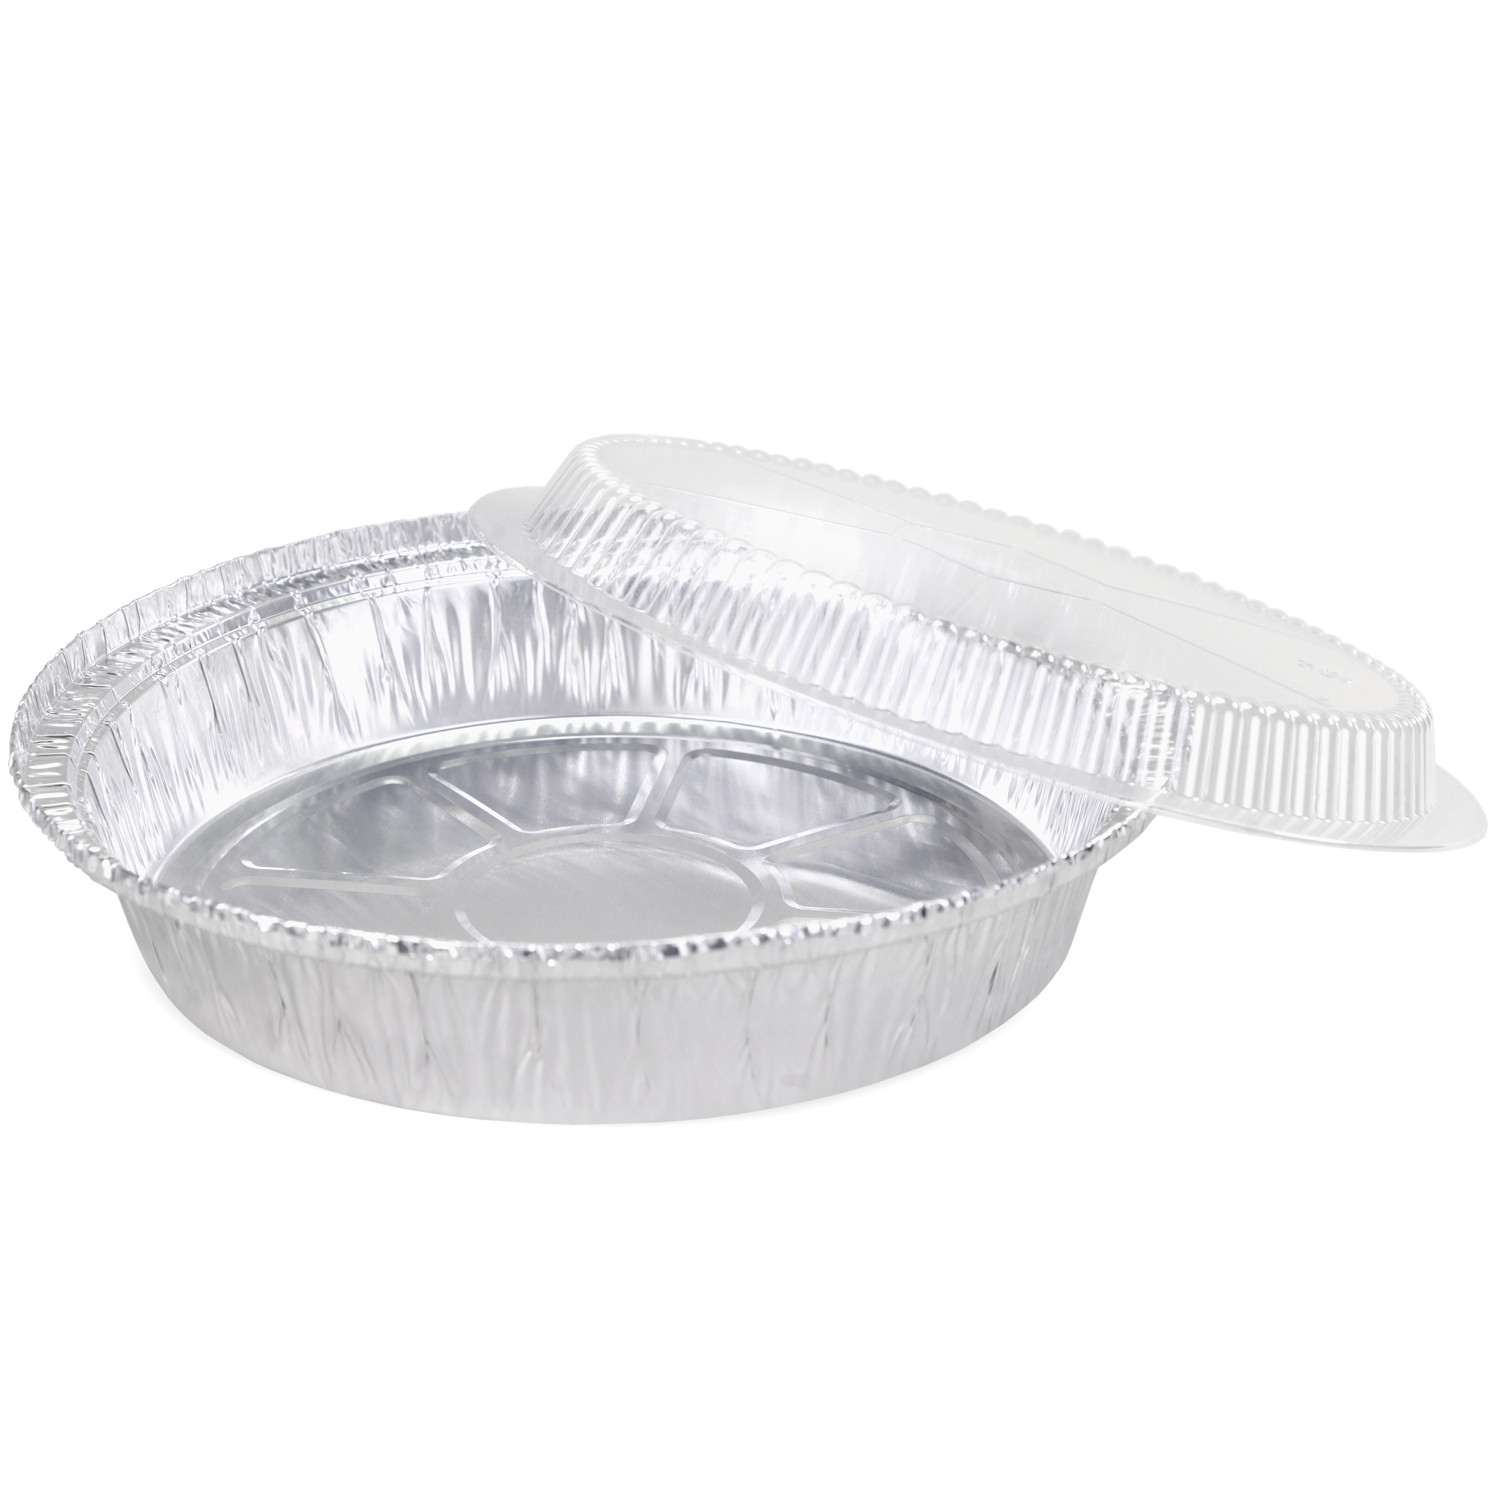 Aluminum Trays with Lids 9X13 for Serving Food Turkey Catering